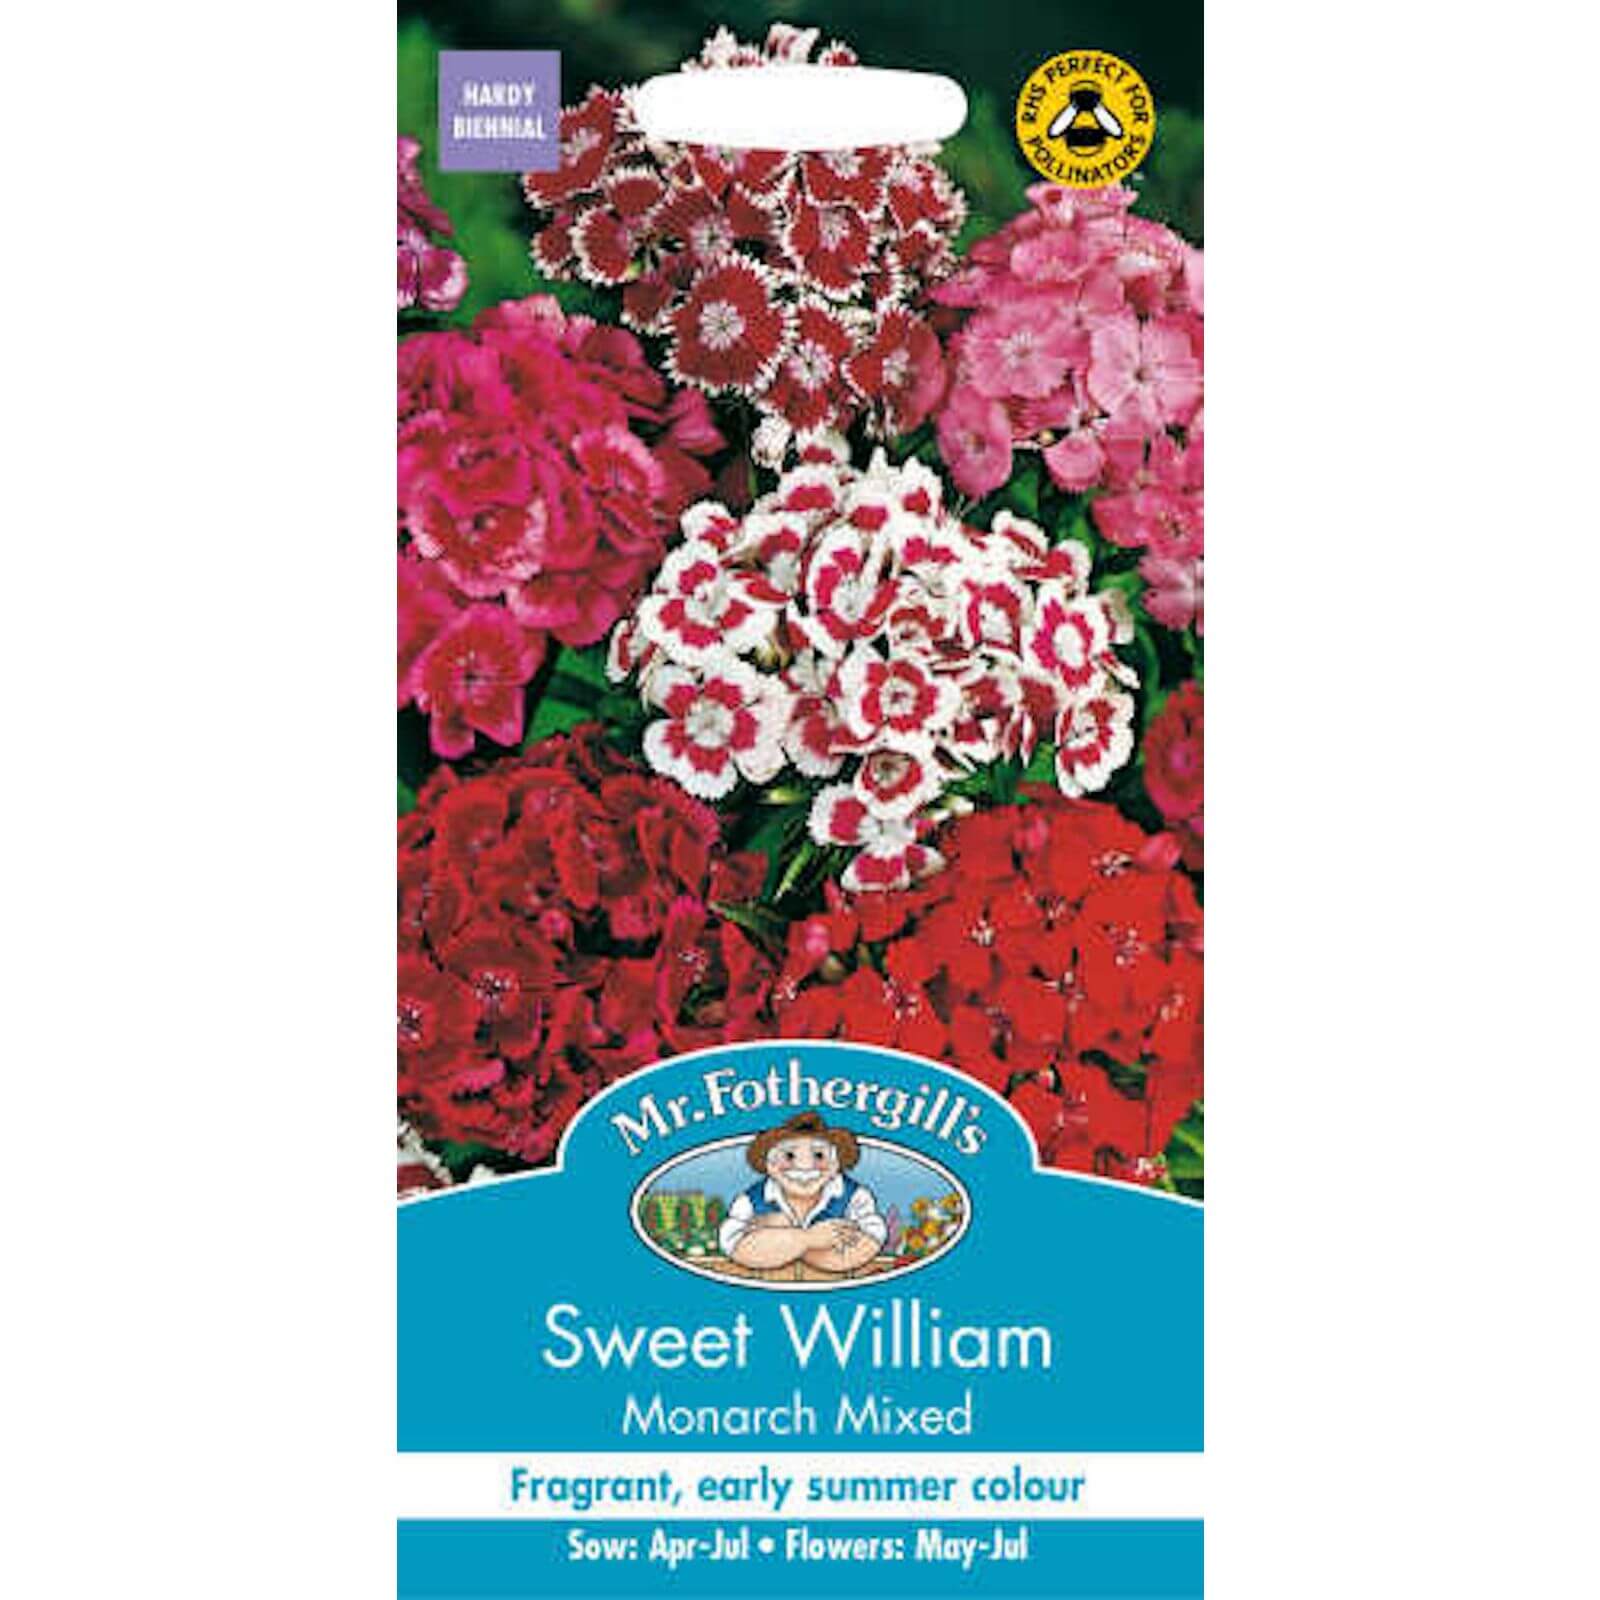 Mr. Fothergill's Sweet William Monarch Mixed Seeds